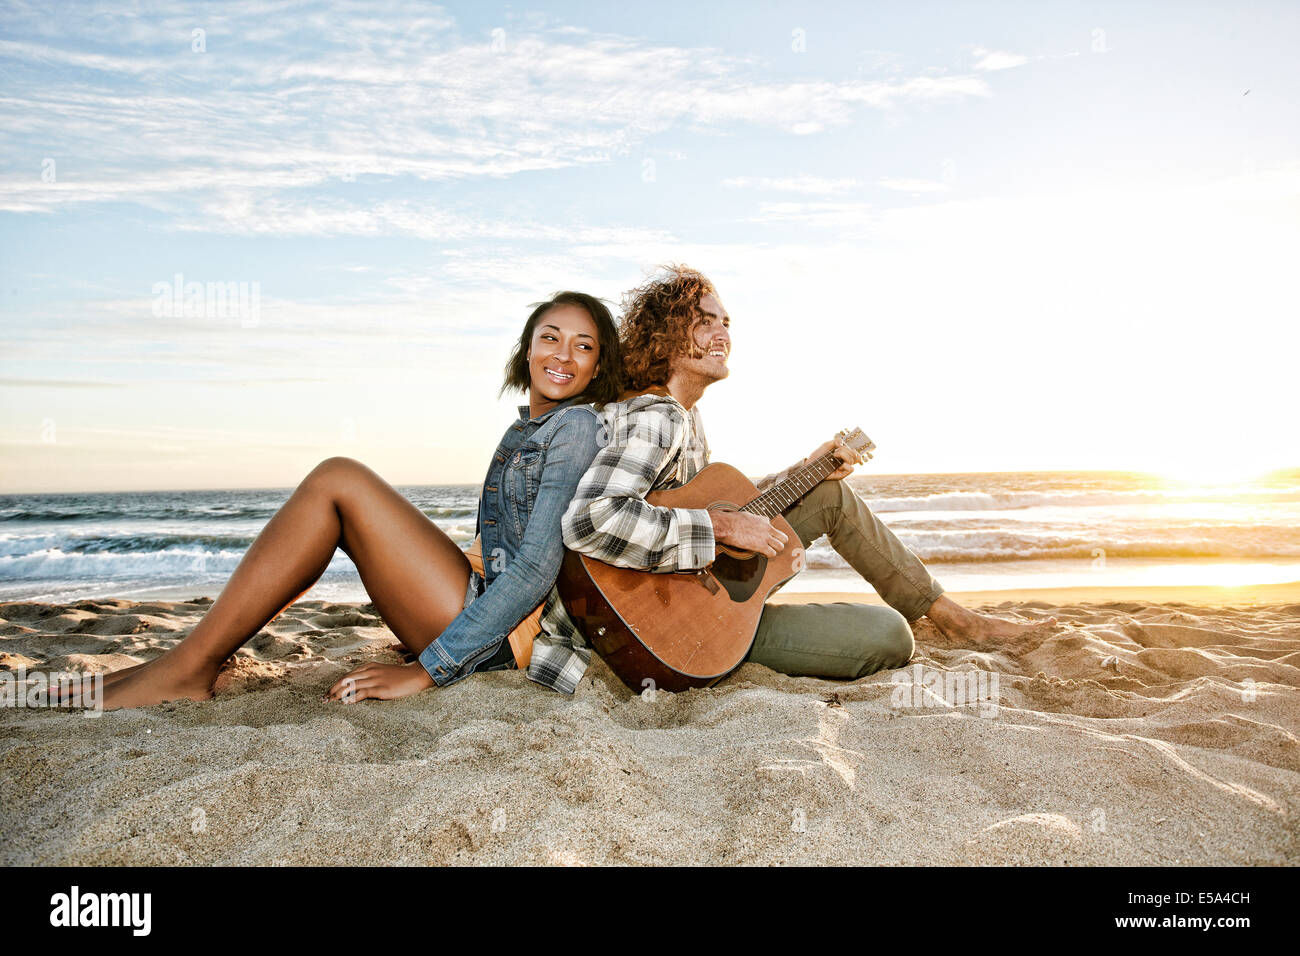 Couple relaxing together on beach Stock Photo